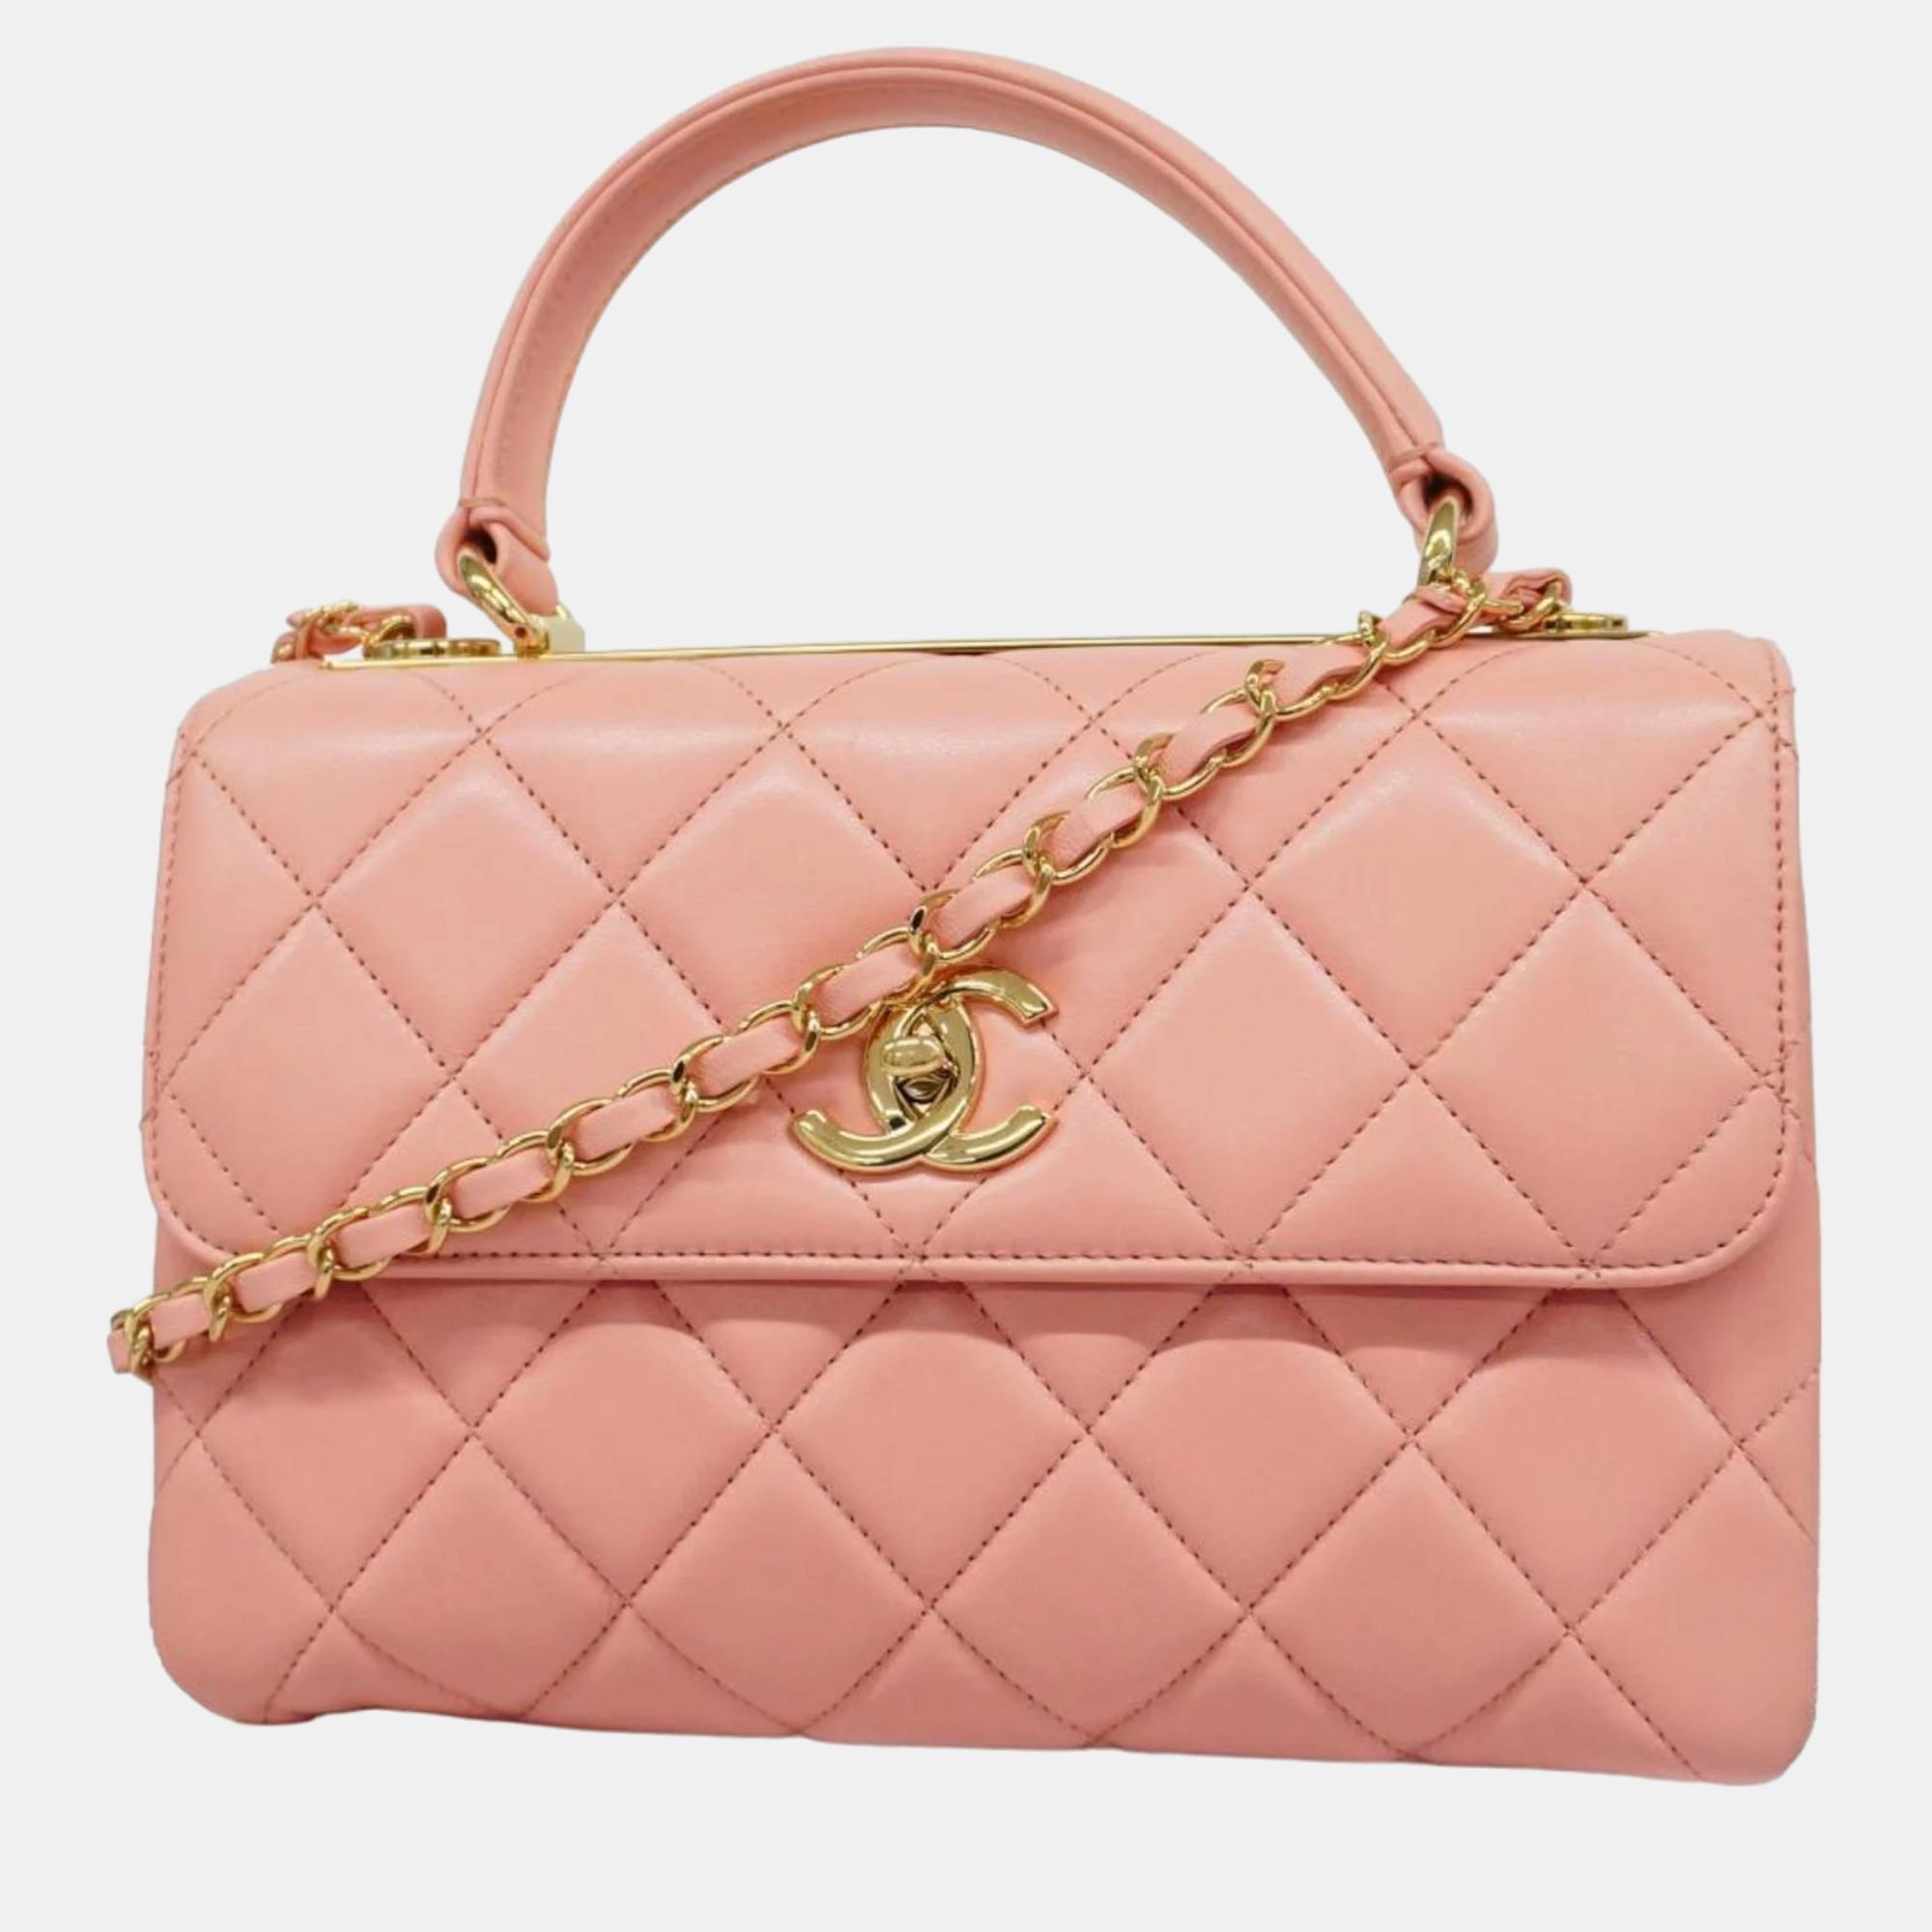 Chanel pink leather small trendy cc top handle bags